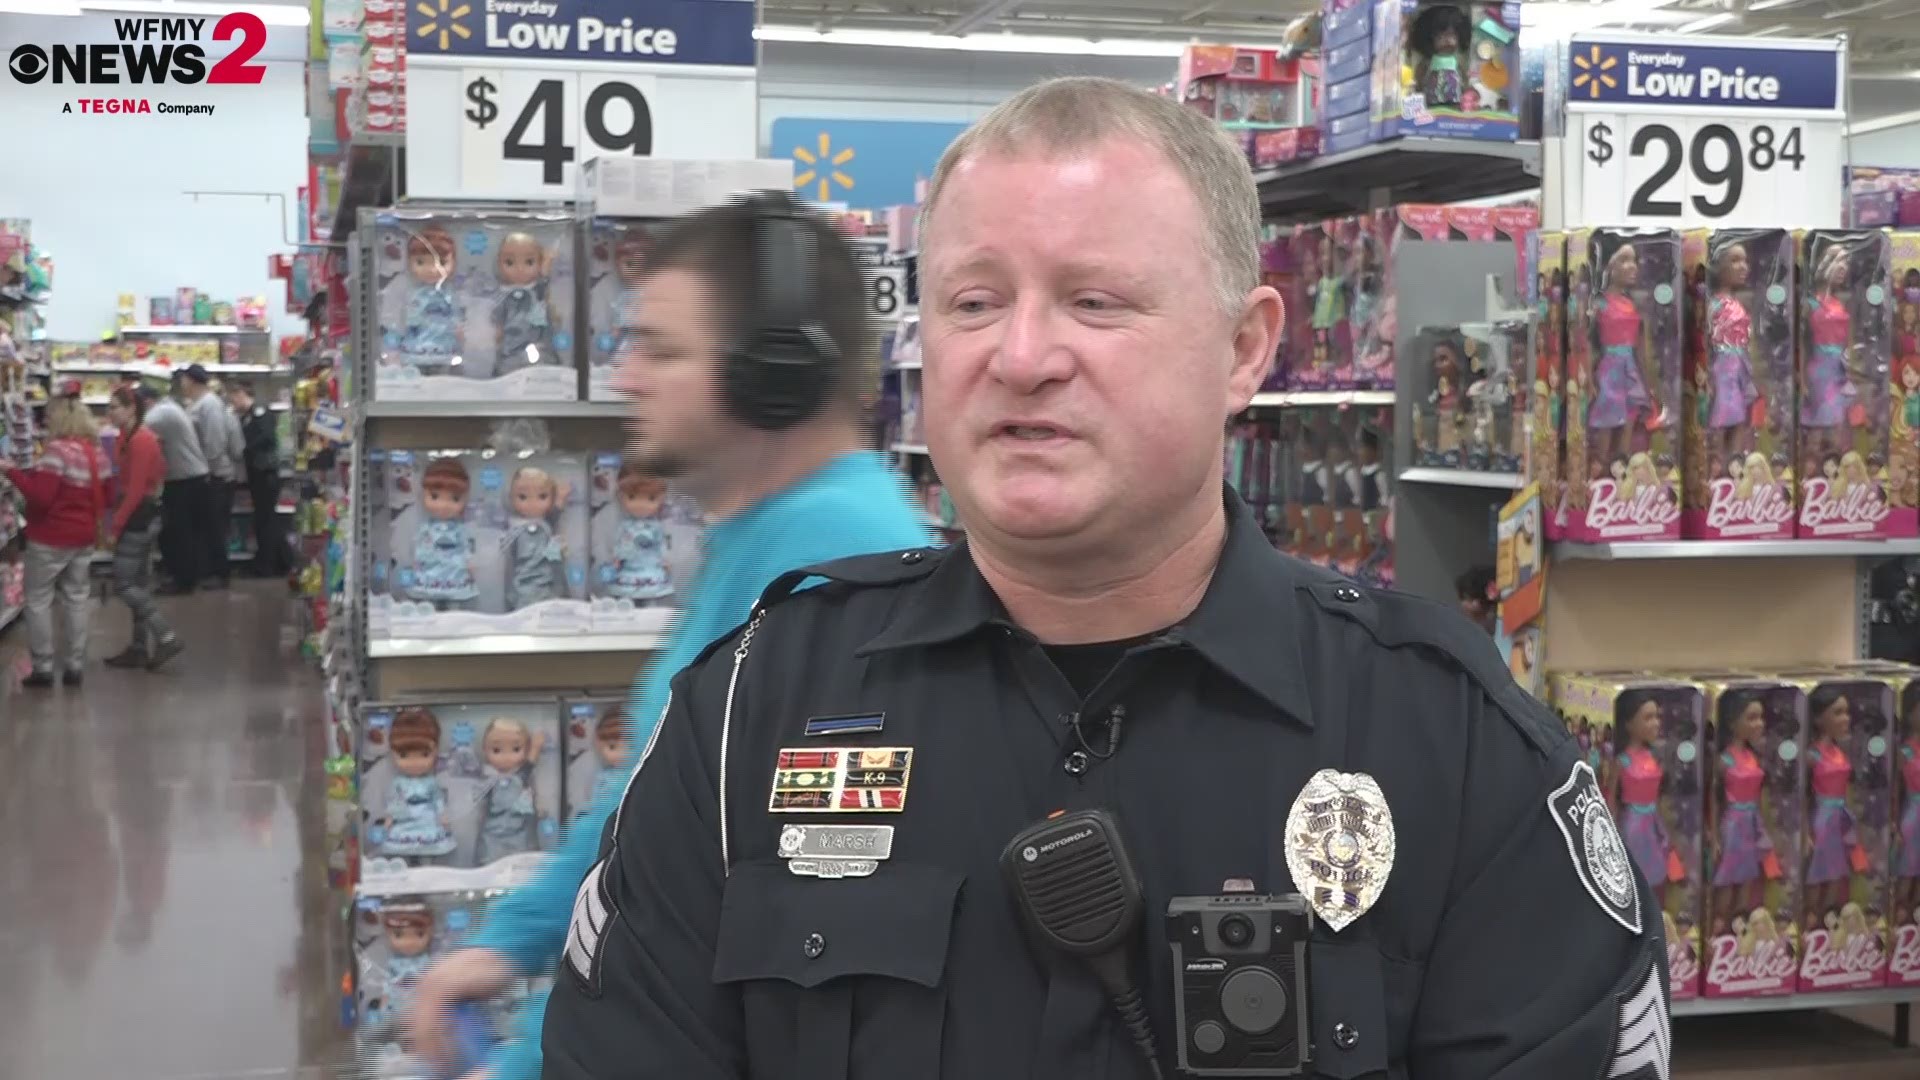 Burlington Police Takes Kids On Shopping Spree For 'Cops Care' Event